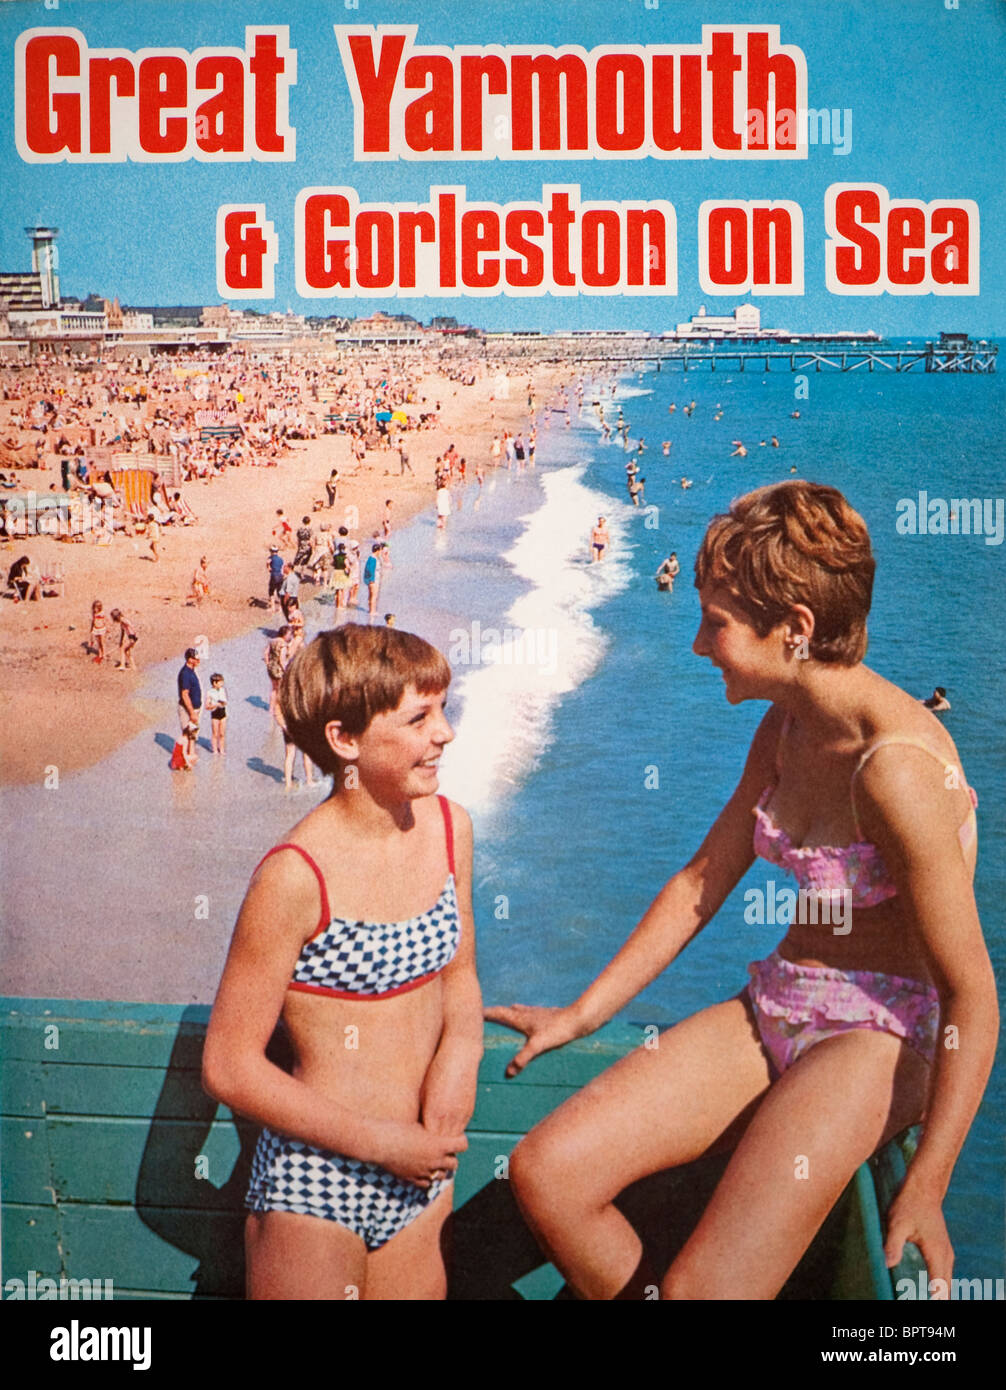 Cover of a Great Yarmouth & Gorleston-On-Sea tour guide brochure advertisement. Stock Photo